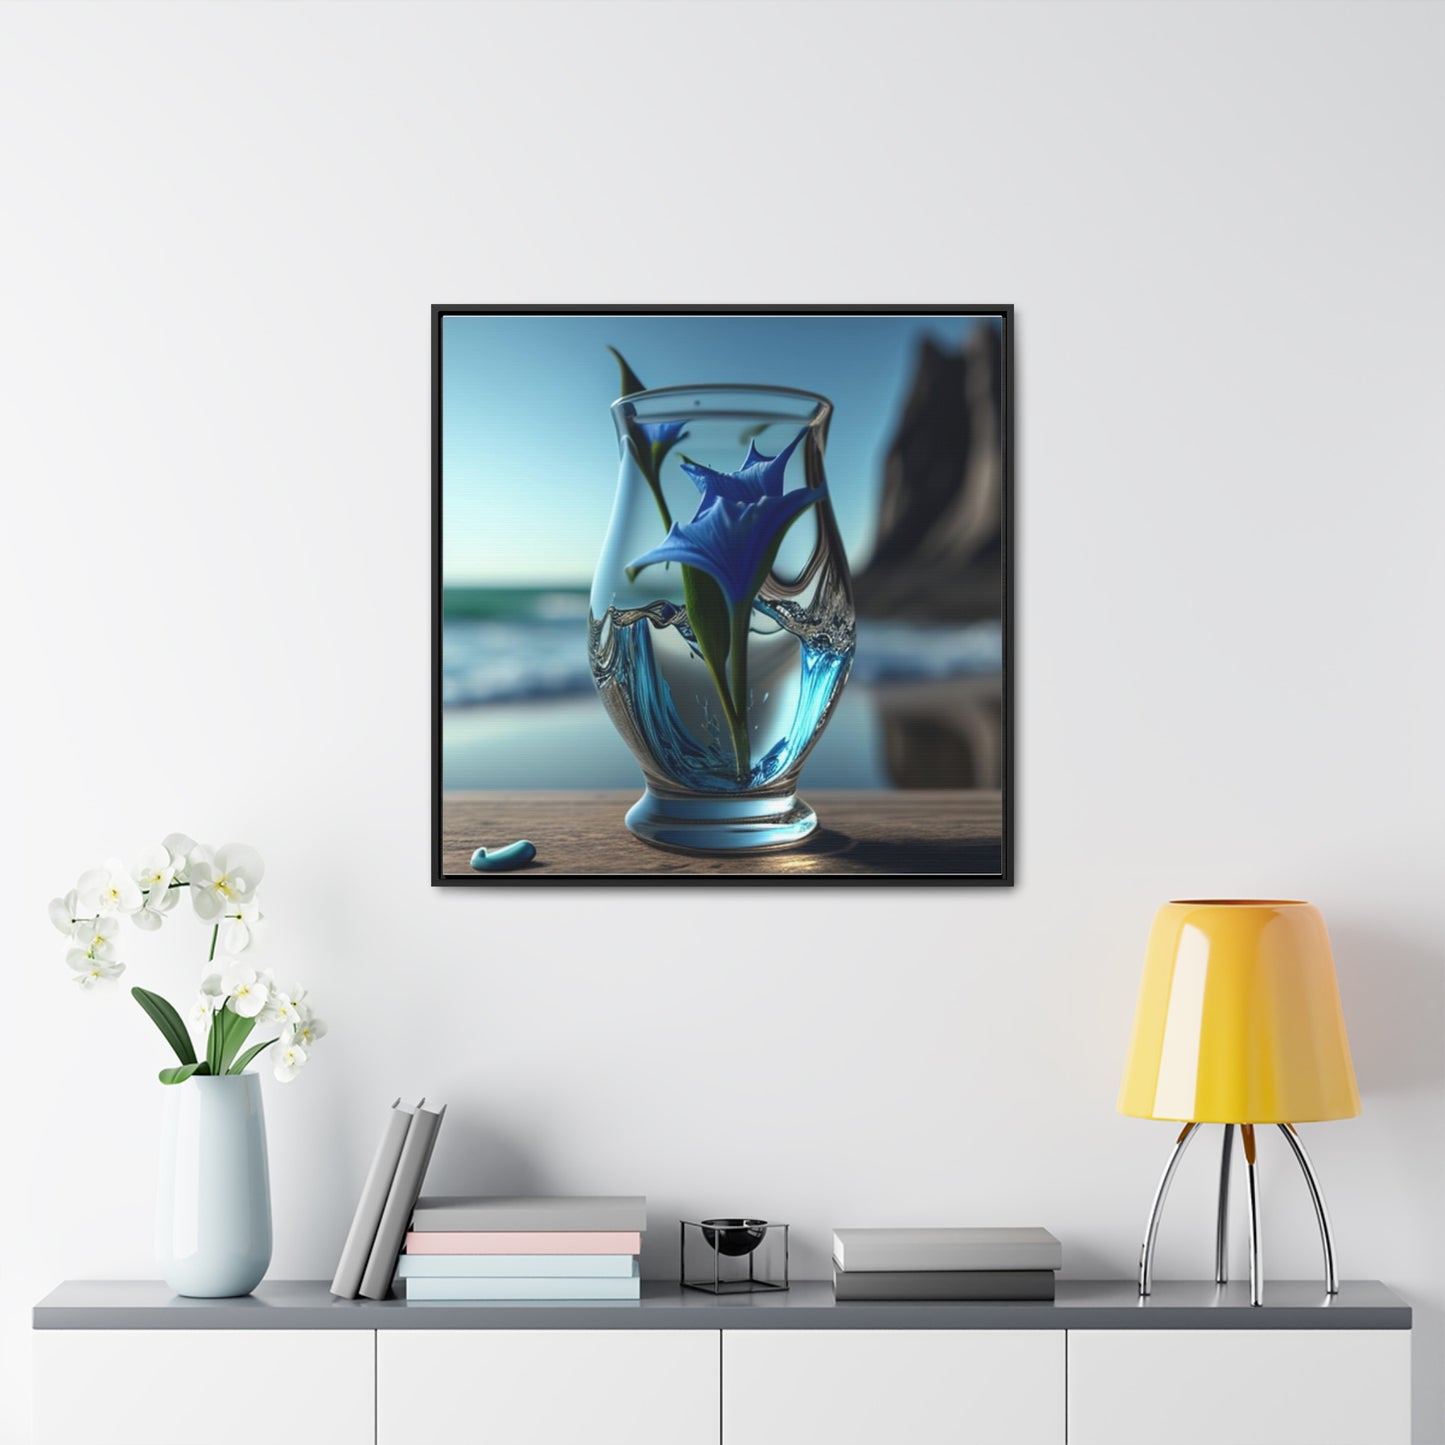 Gallery Canvas Wraps, Square Frame The Bluebell 2